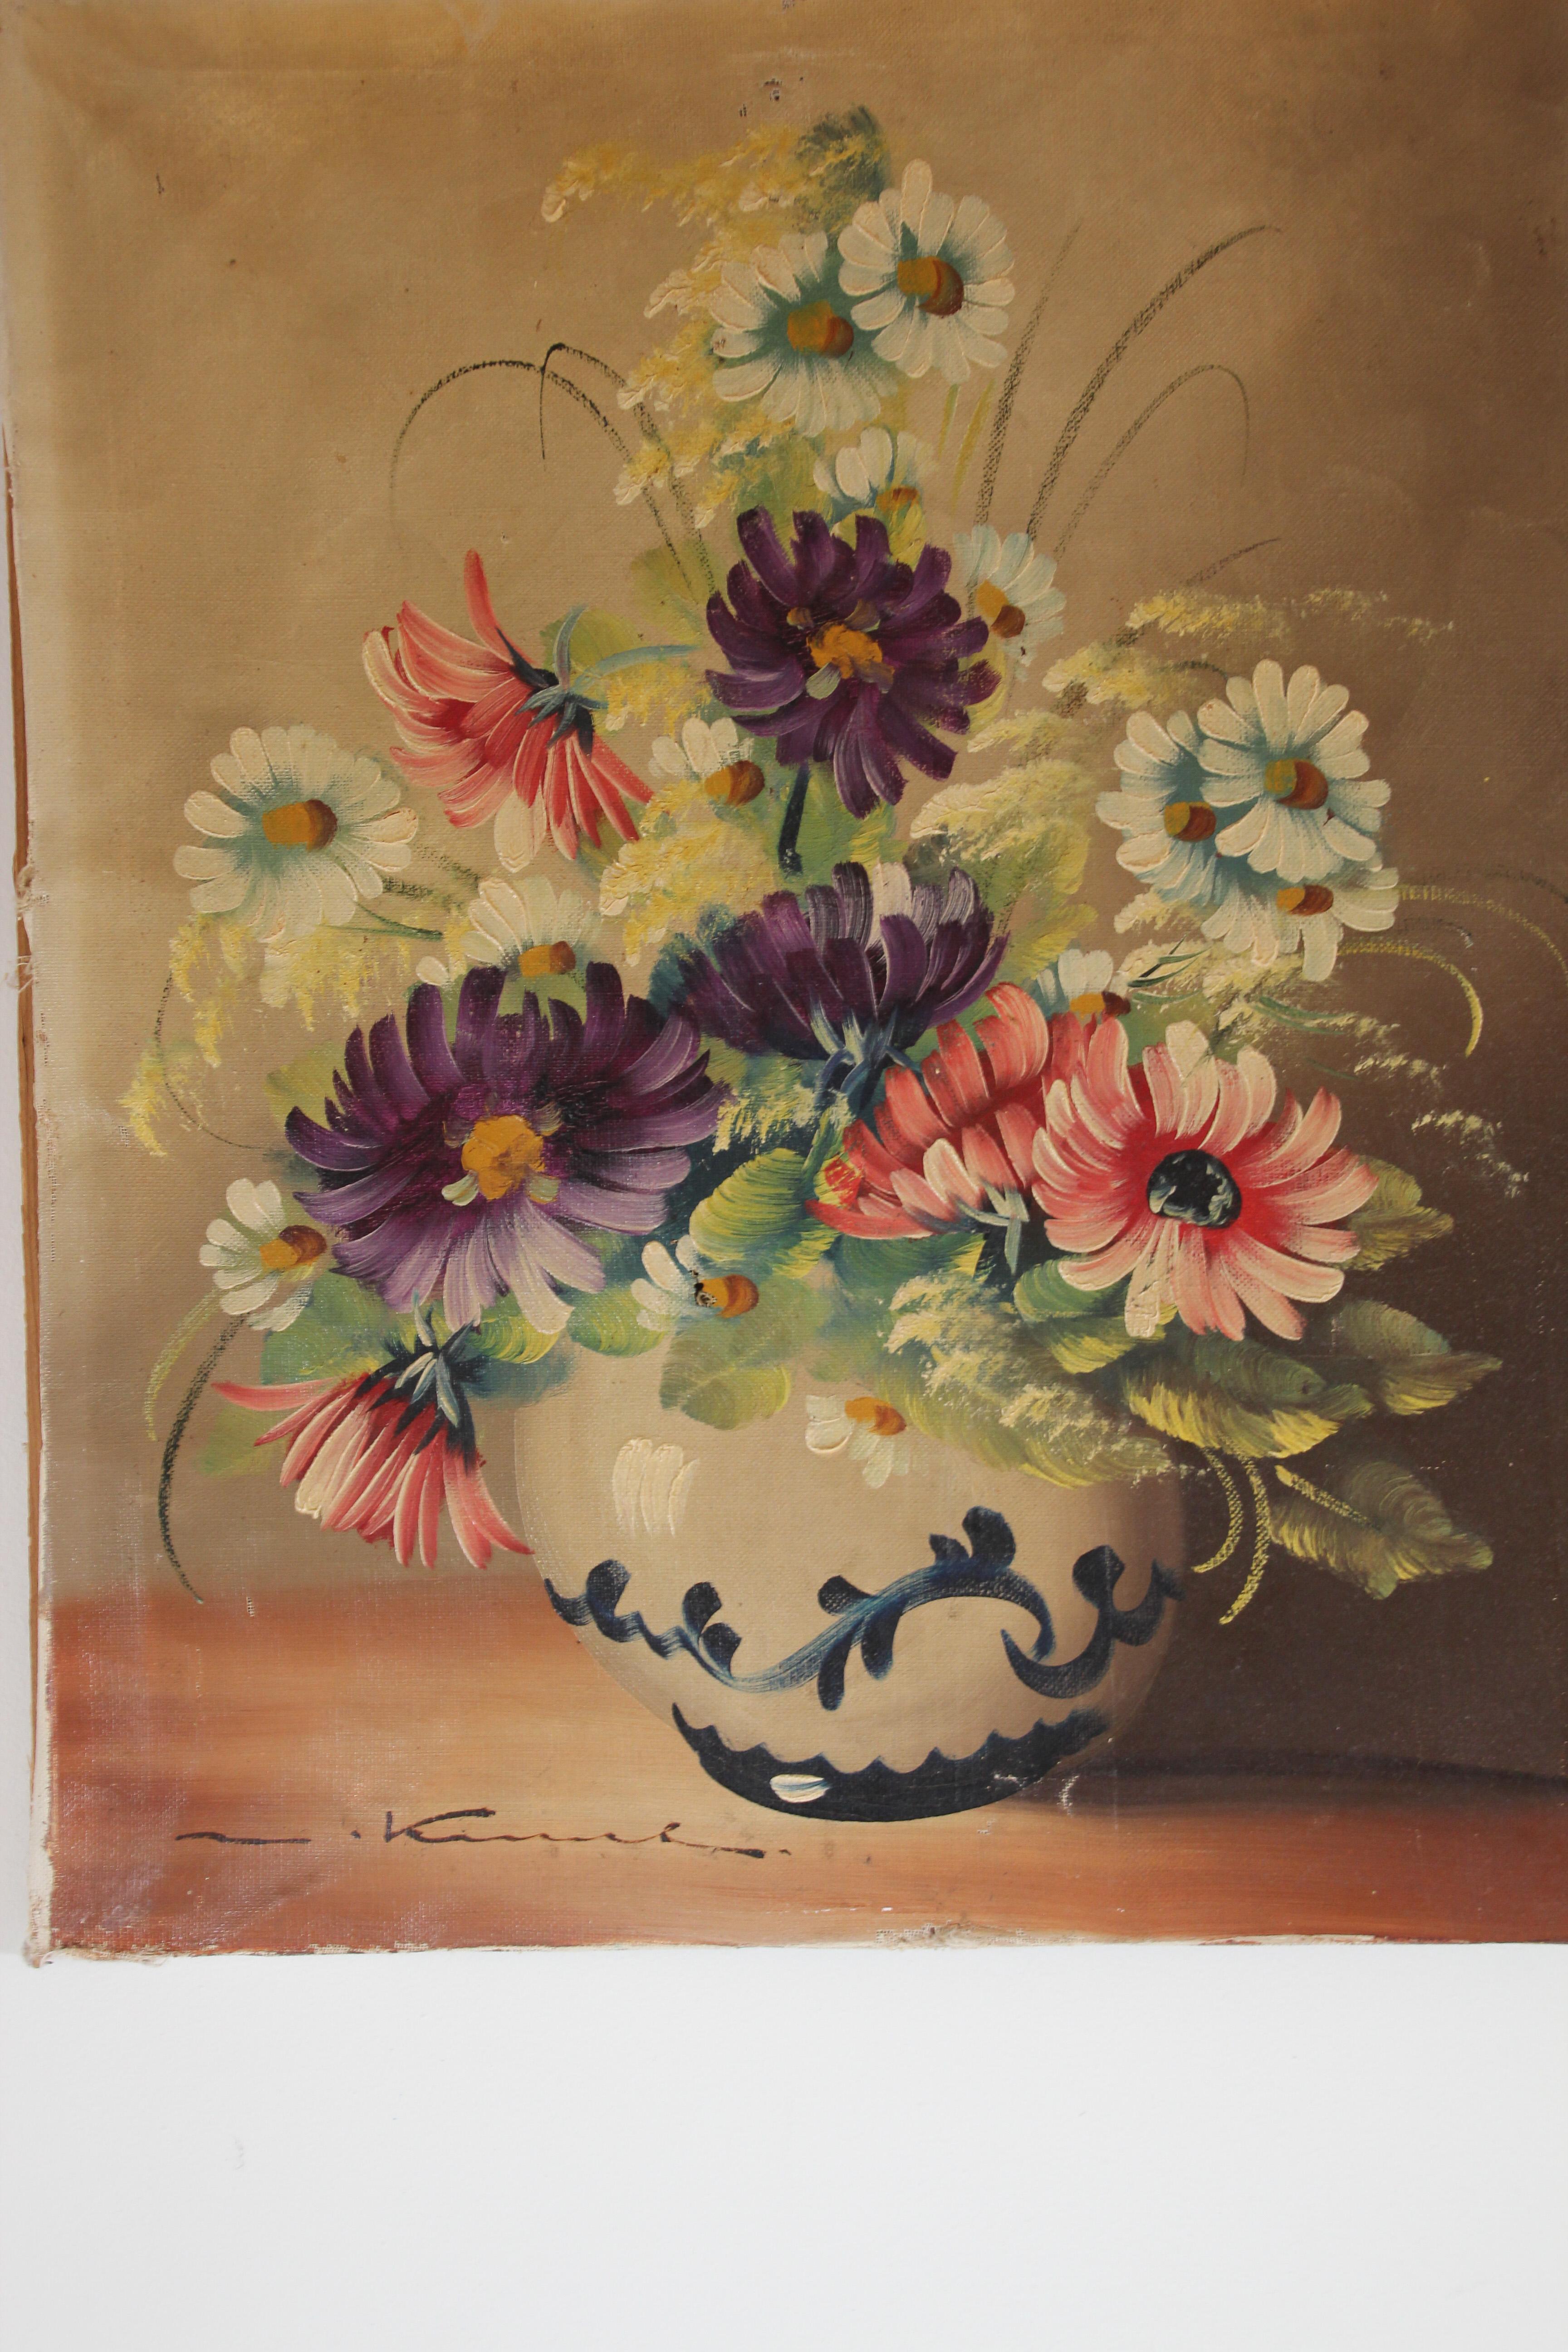 Early to mid 20th century French oil painting on canvas of flowers in a vase. 
Really beautifully painted early 20th century still life signed by artist.
Not framed just stretched canvas.